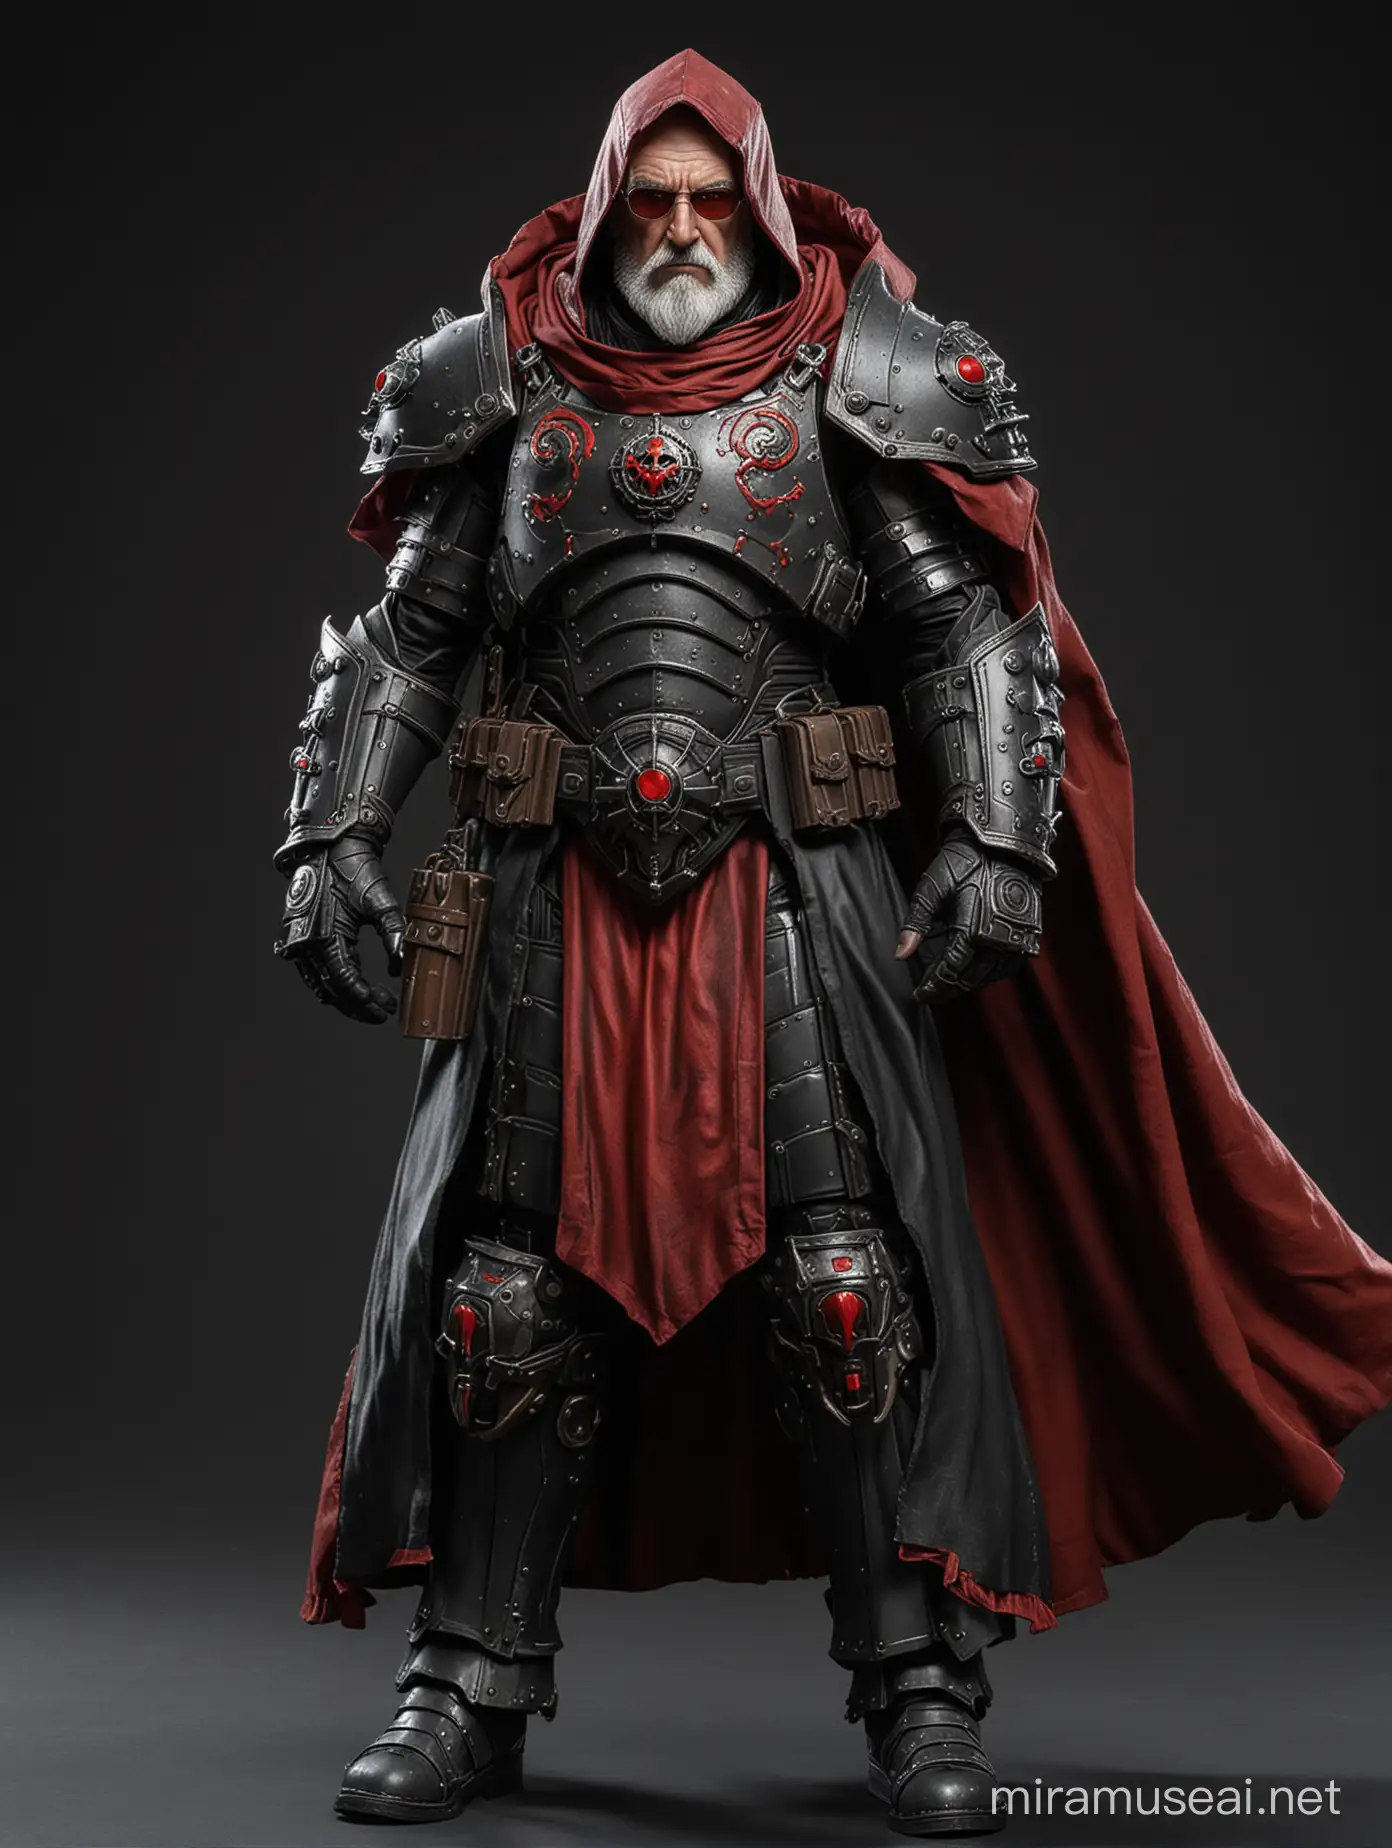 Mysterious 50YearOld Inquisitor in Black Warhammer 40k Power Armor with Red Cloak